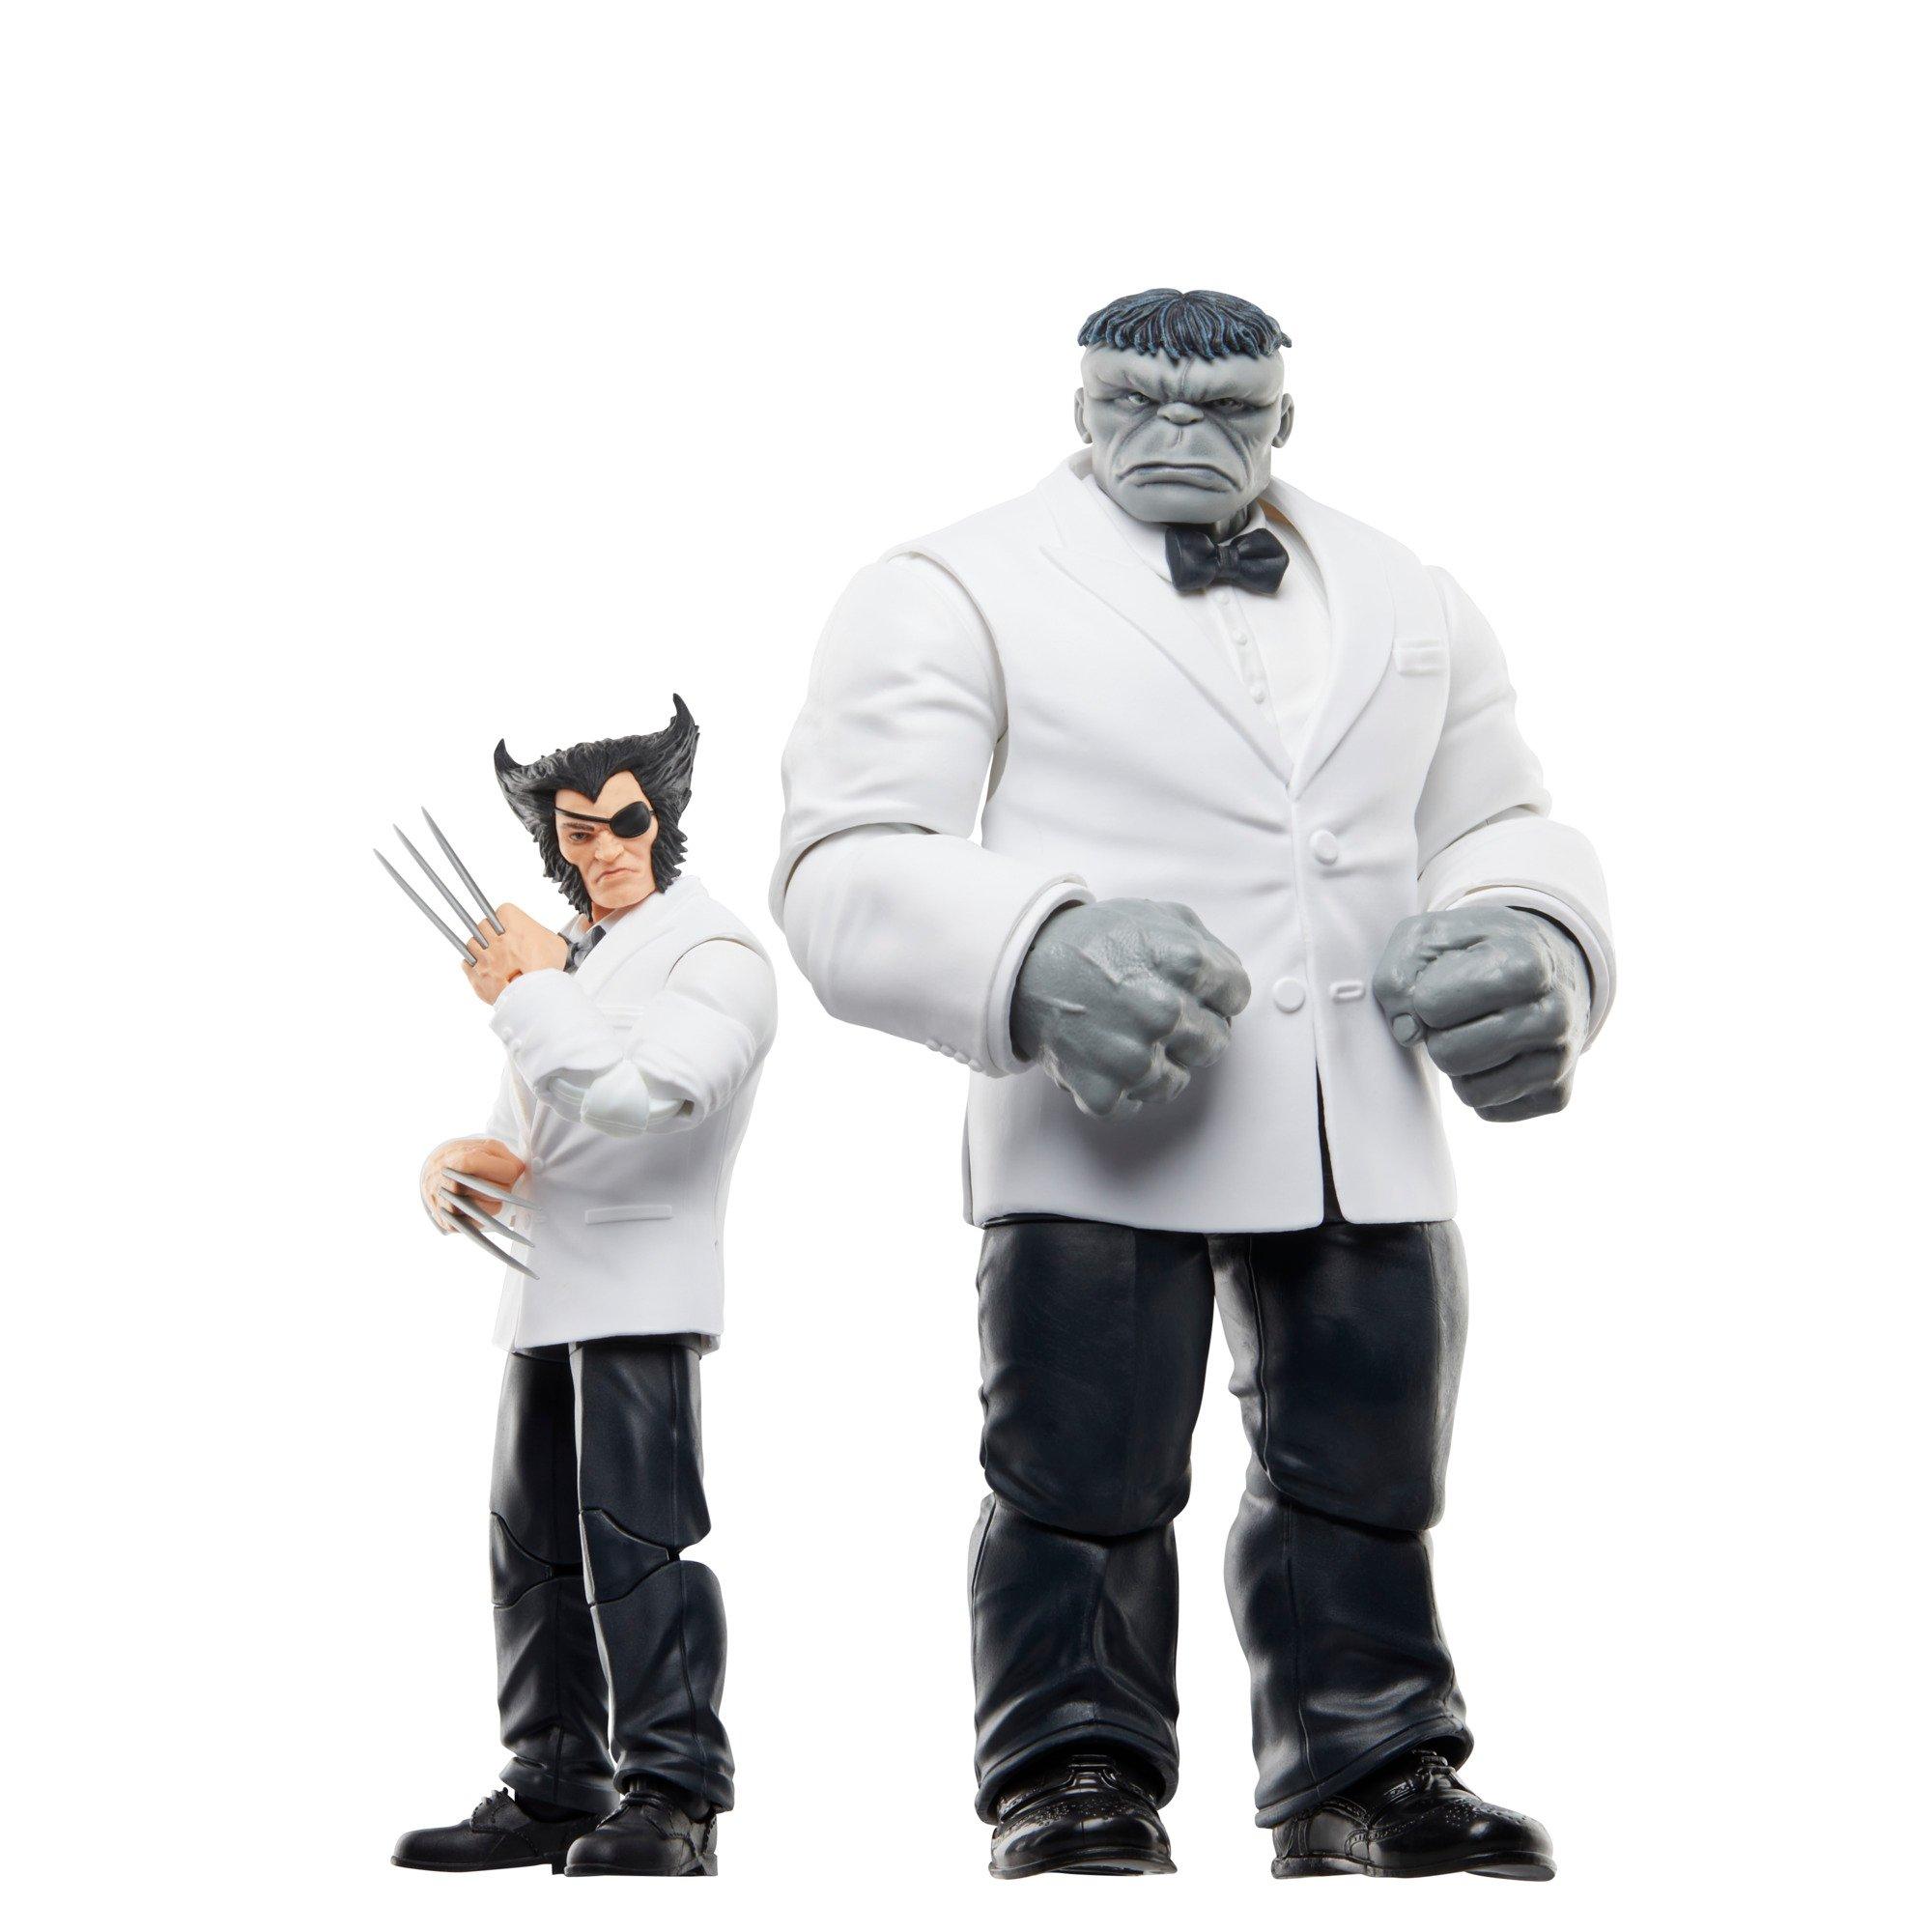 Hasbro Marvel Legends Wolverine 50th Anniversary Patch and Joe Fixit Action Figure Set 2-Pack